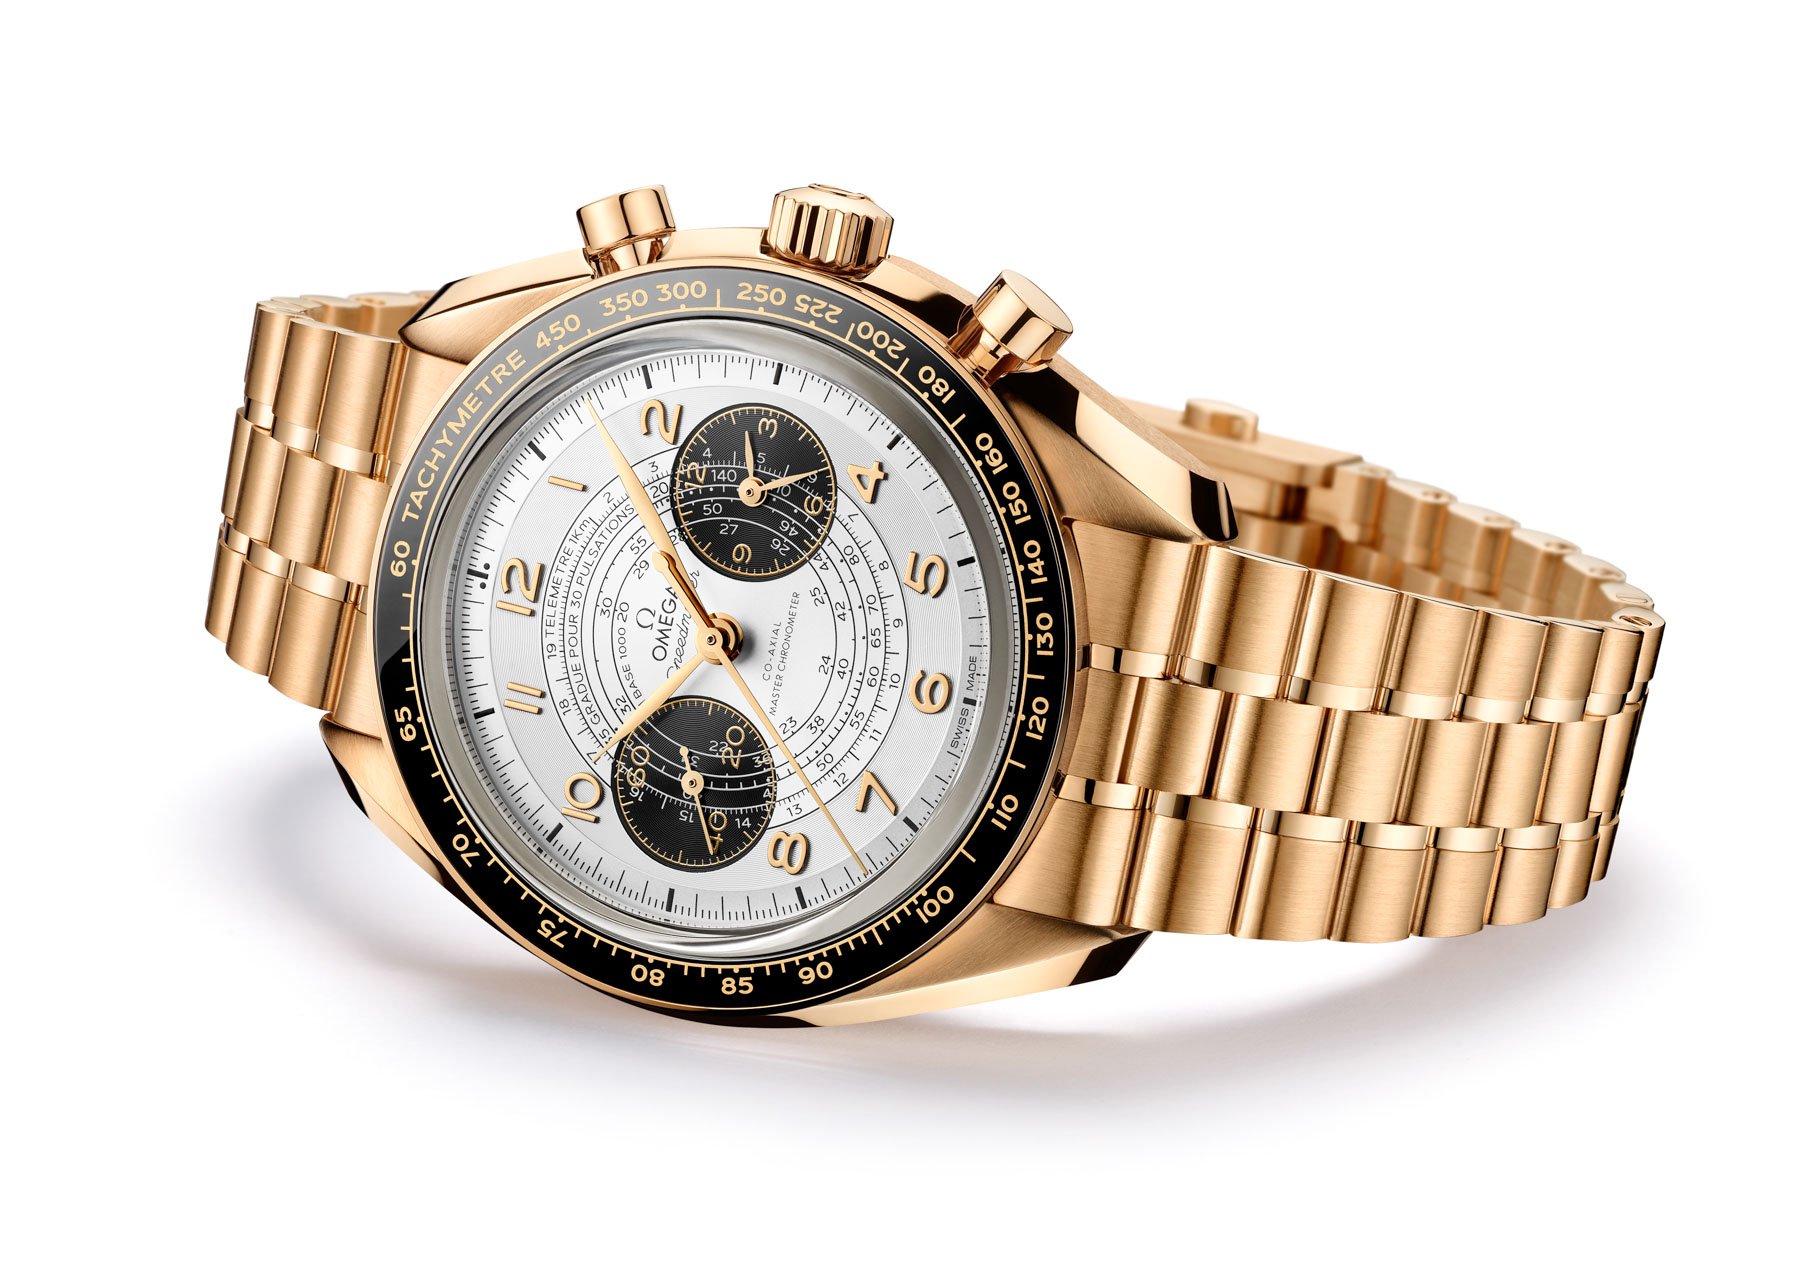 Omega Is Going For Gold At The Paris 2024 Olympic Games With Two New Versions Of The Speedmaster Chronoscope